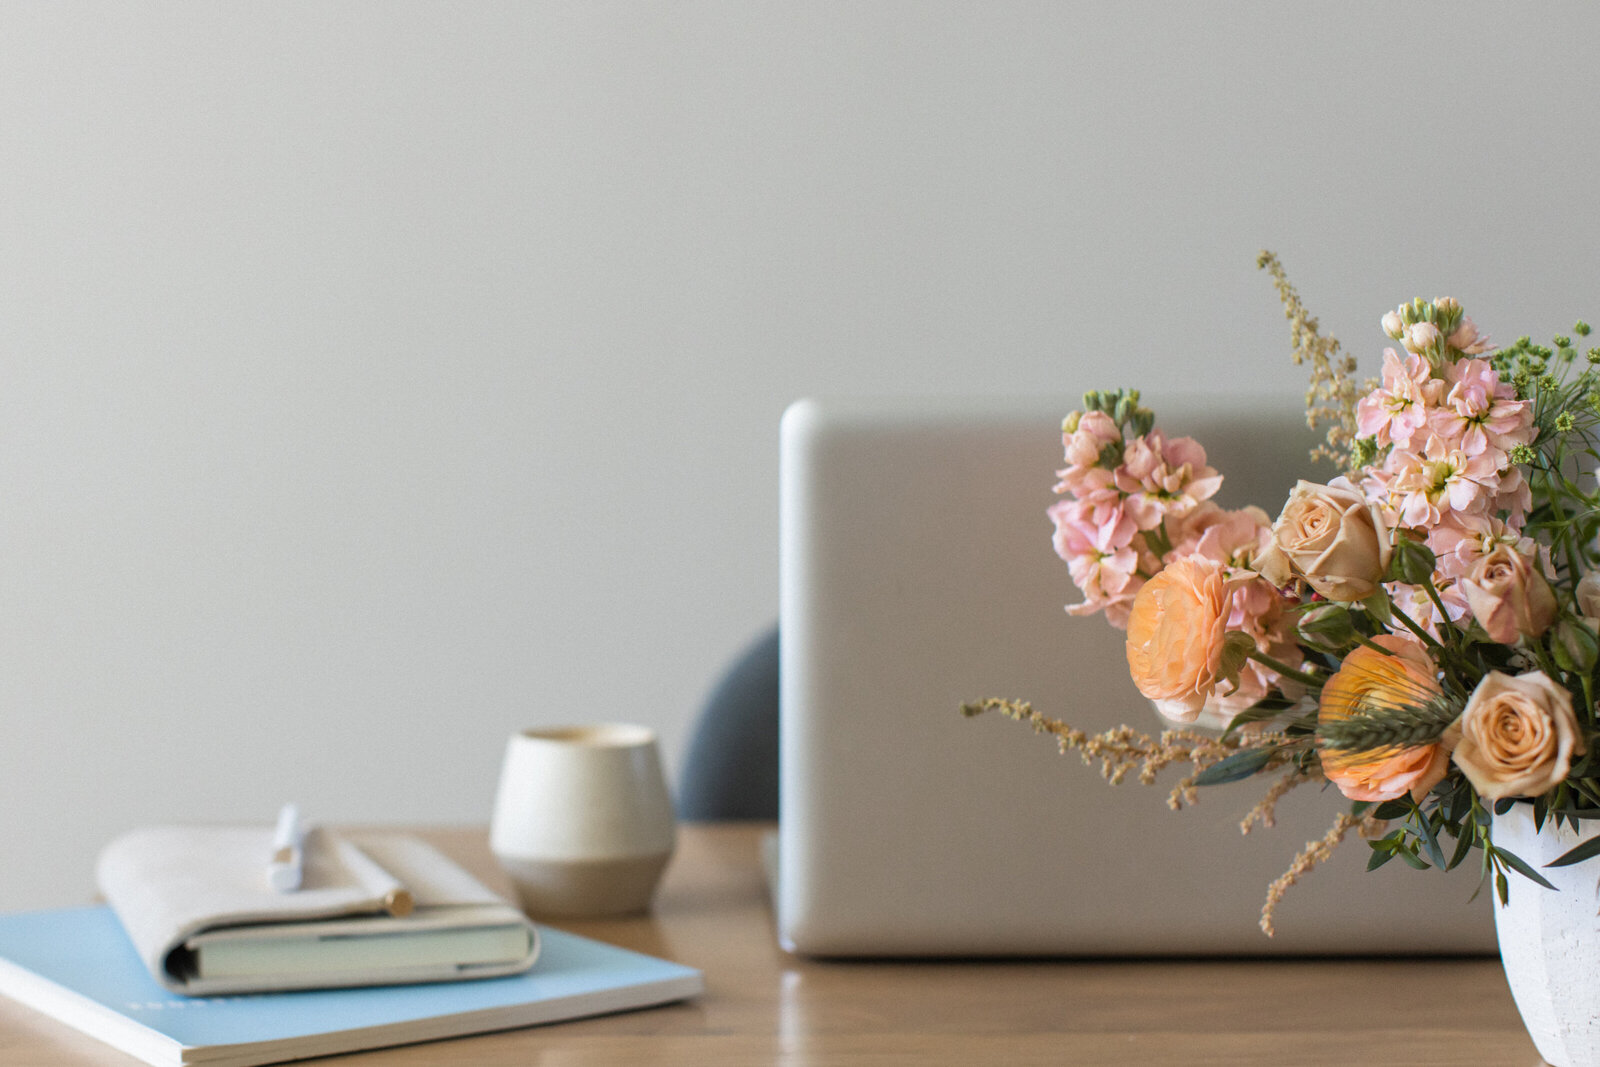 Colorful bouquet of flowers in a white vase on a wooden desk in front of a laptop.